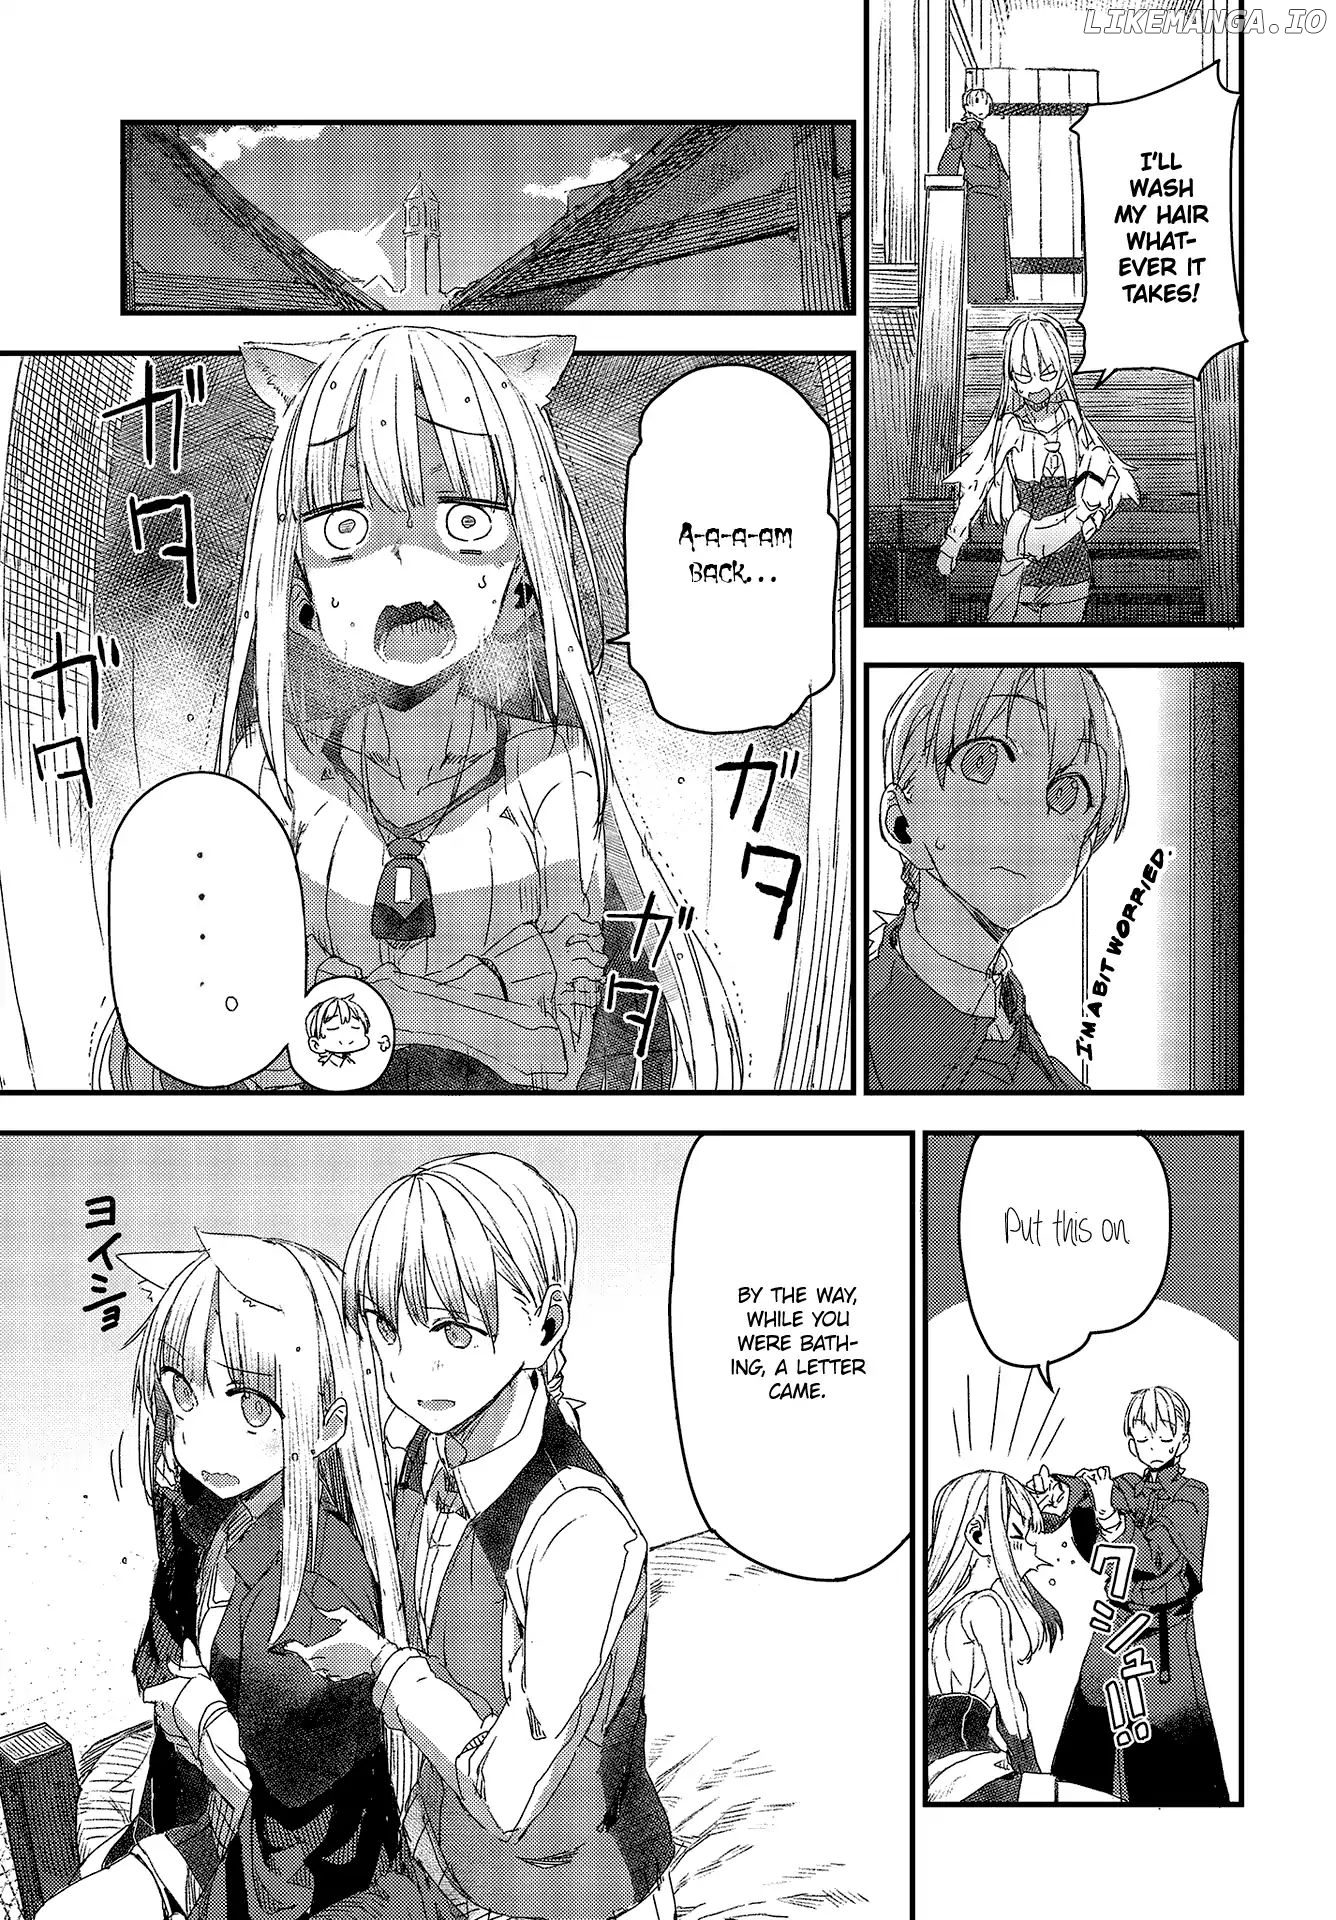 Wolf & Parchment: New Theory Spice & Wolf chapter 3 - page 7